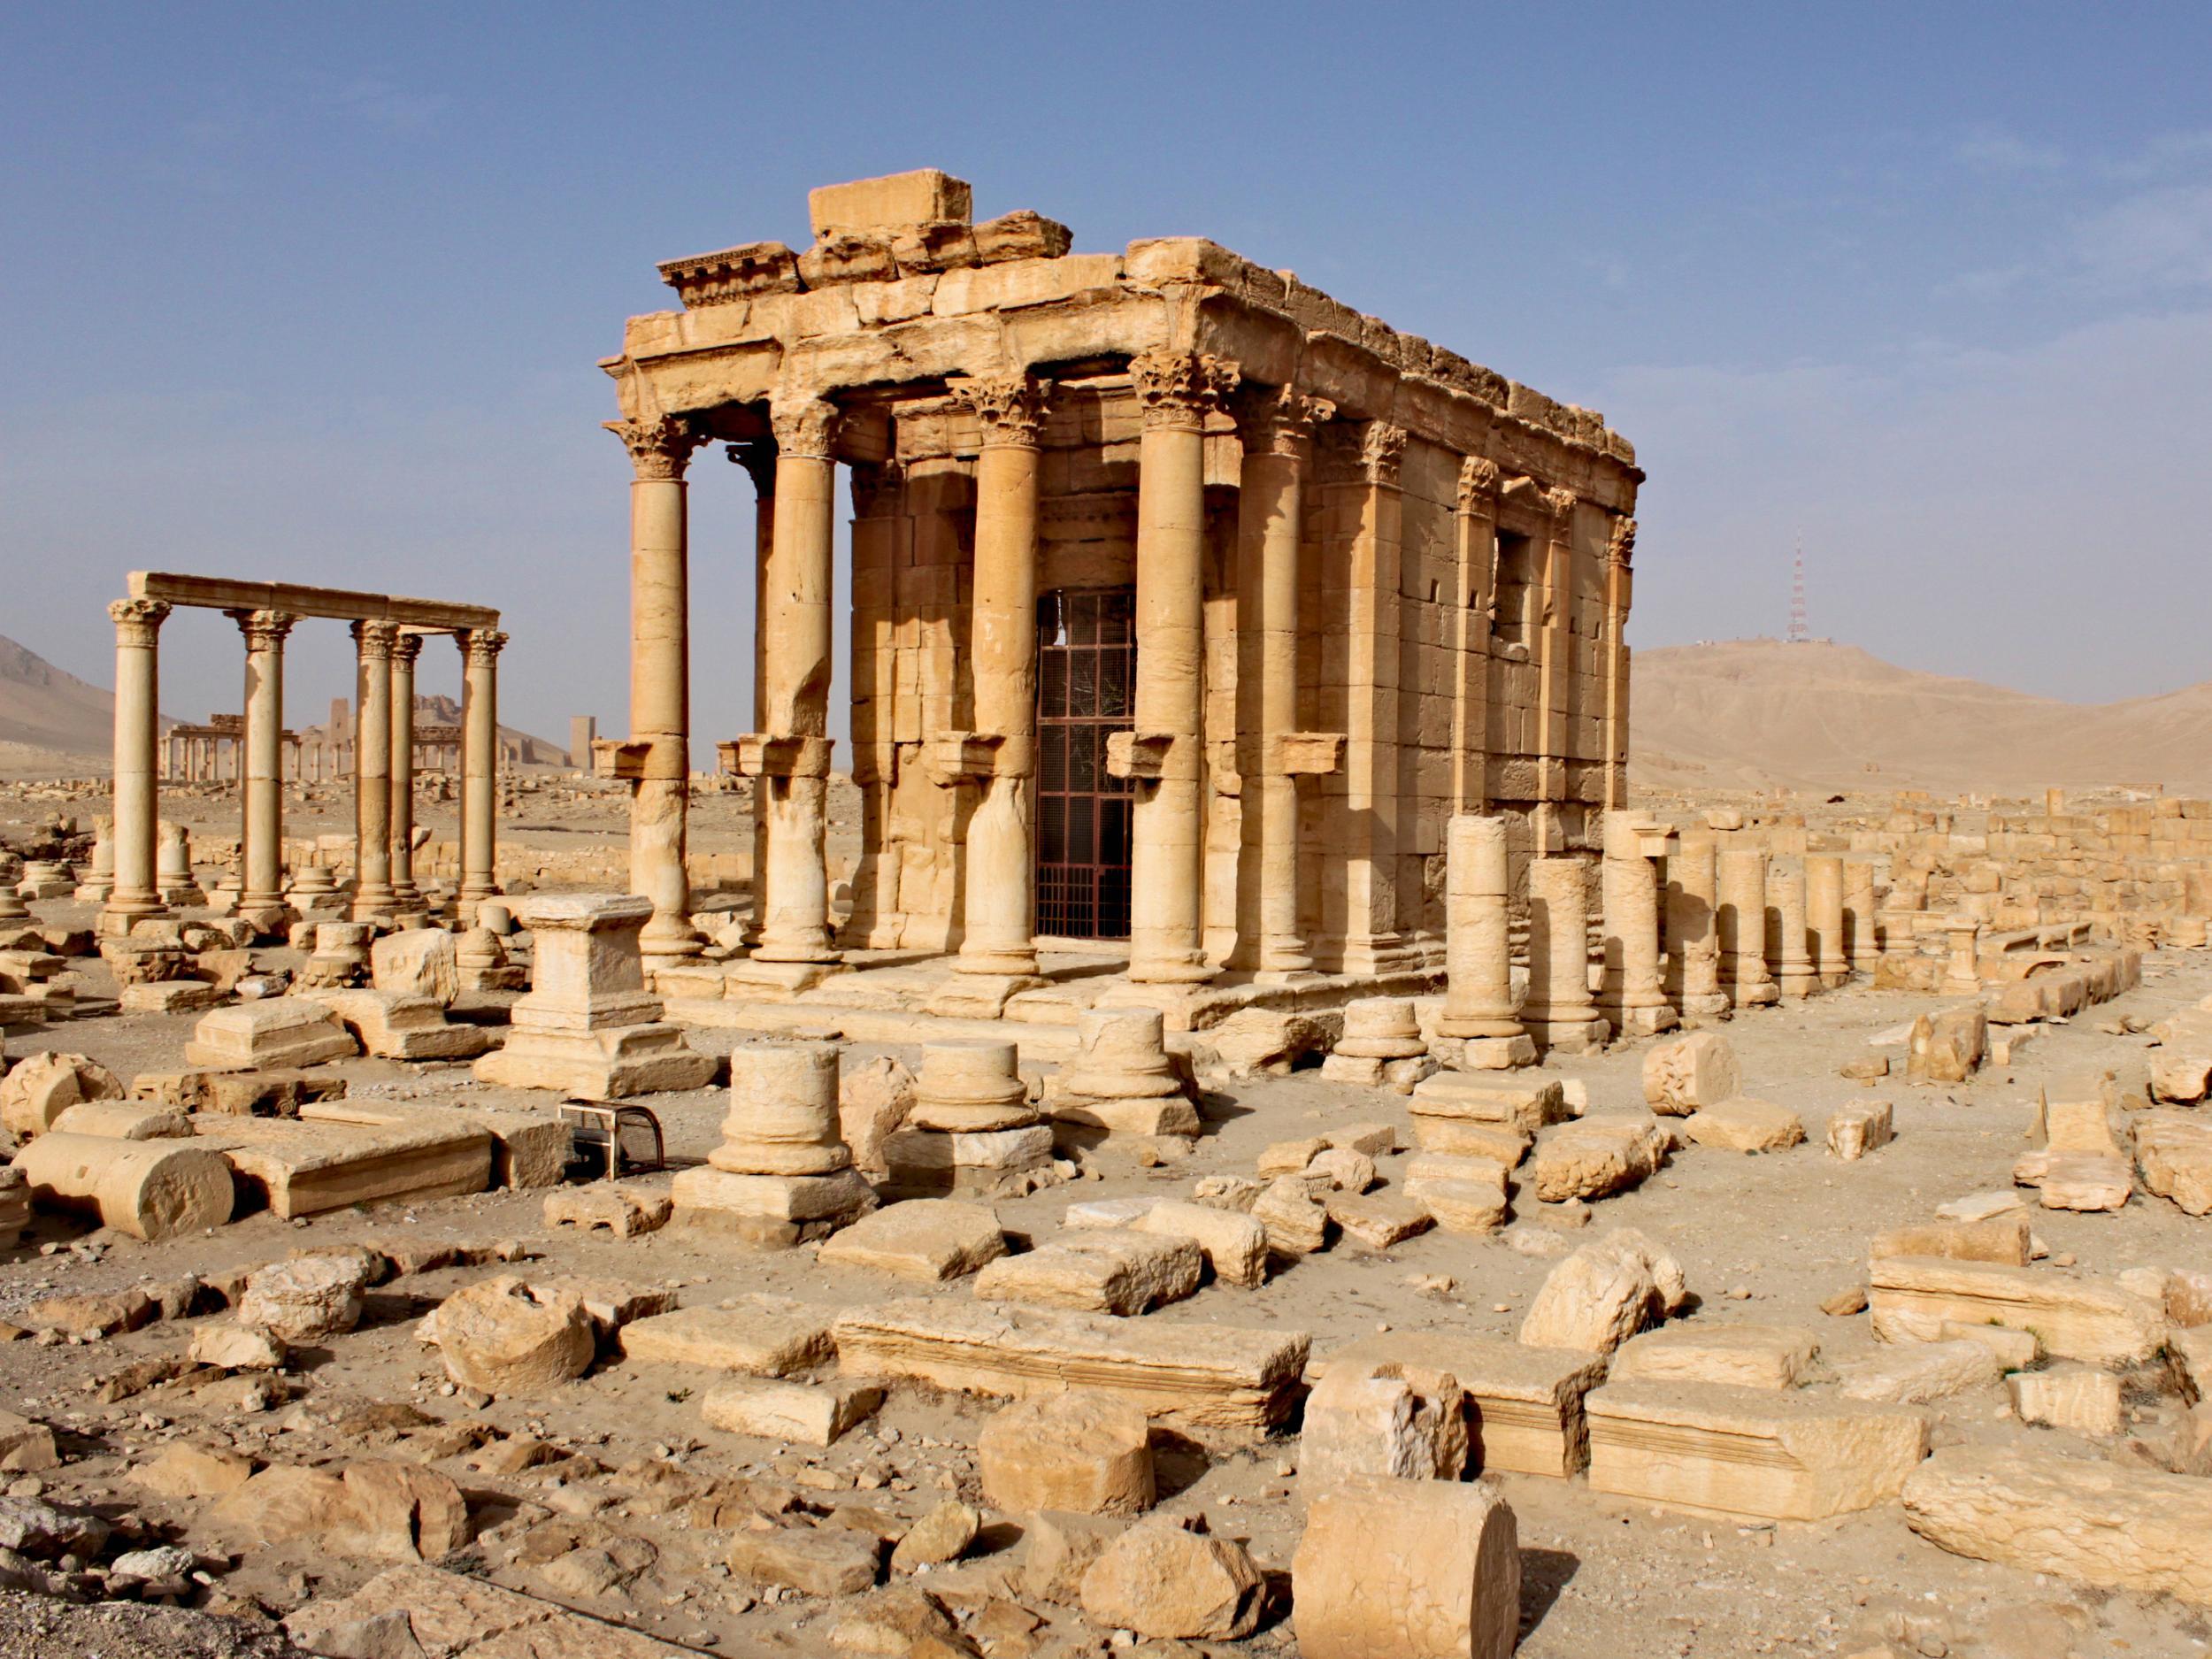 The ancient city of Palmyra, outside of Homs, before the war